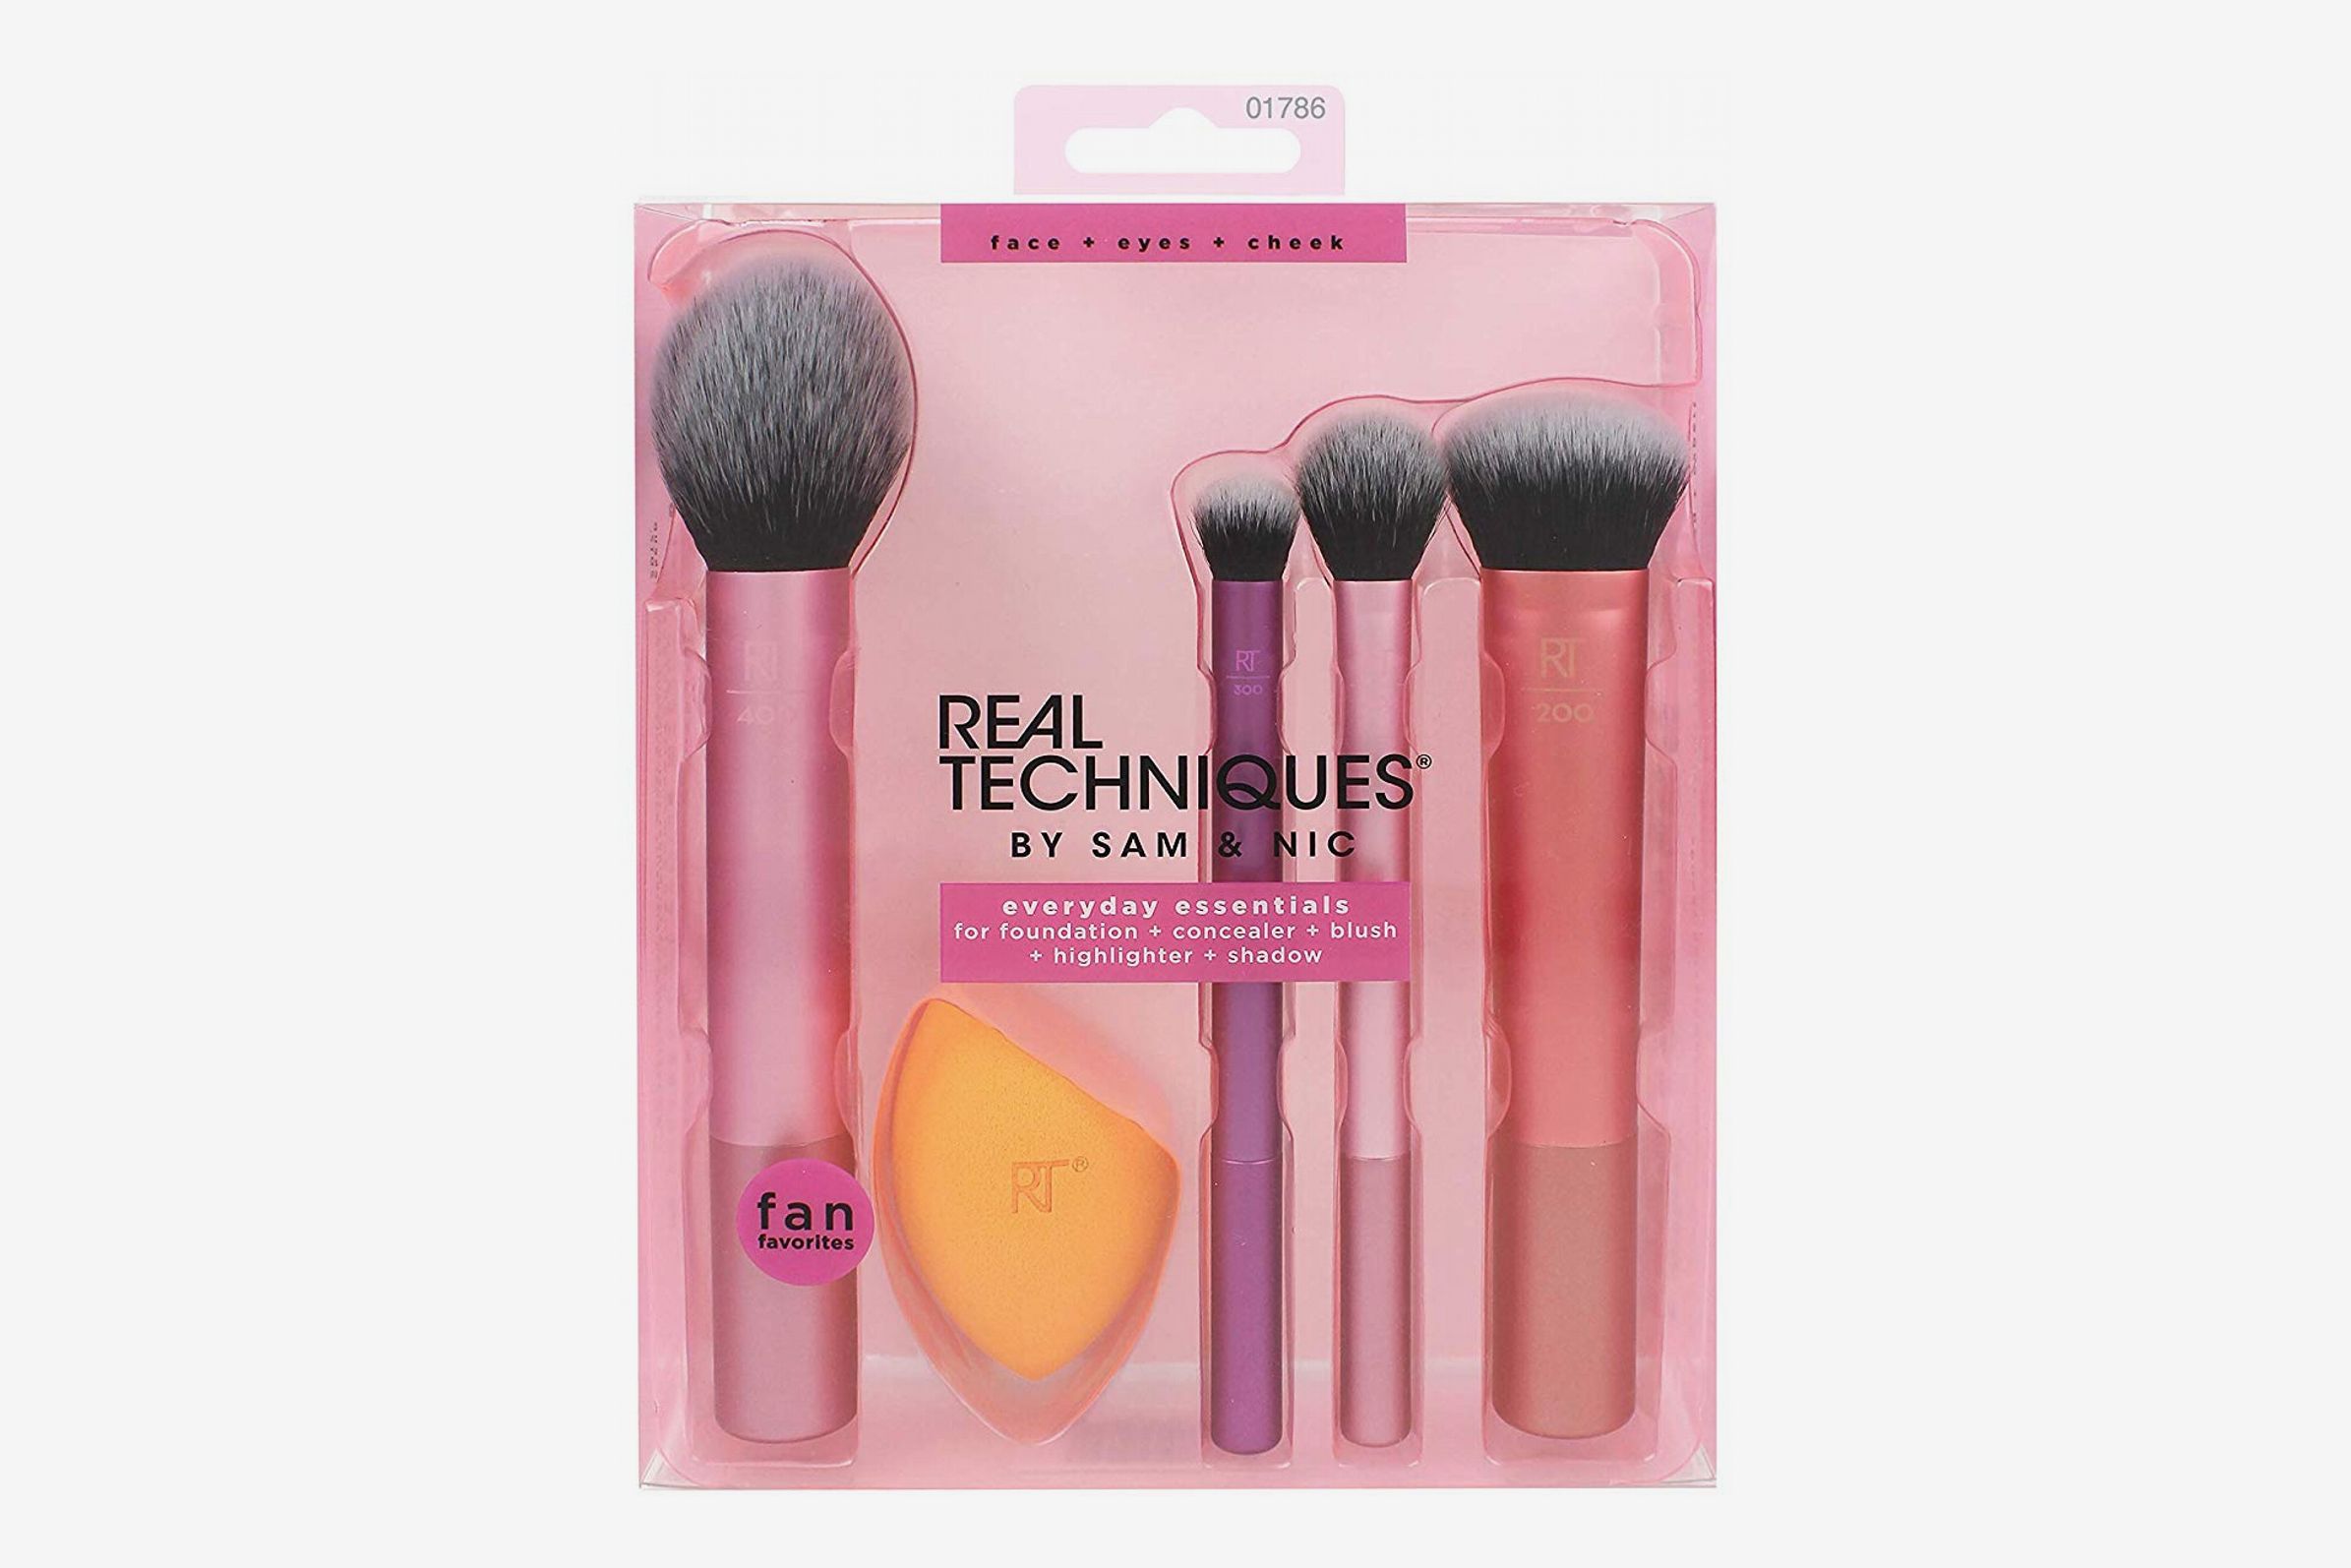 Real Techniques Everyday Essentials Brush Set Review 2019